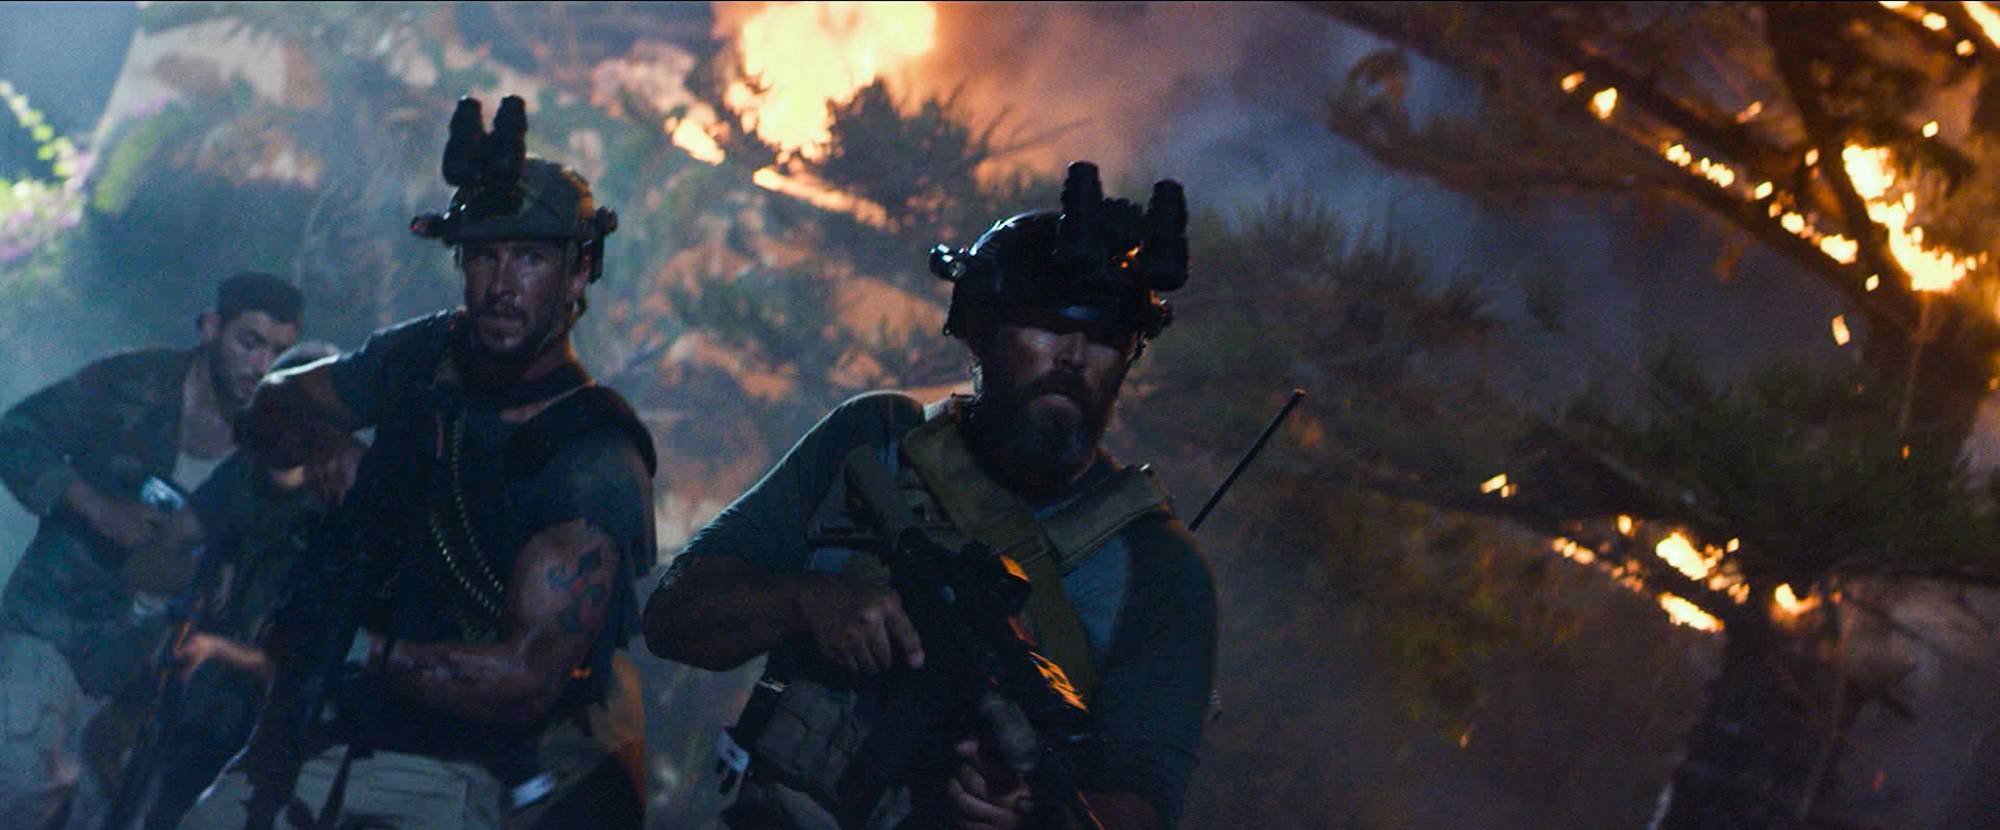 WATCH: Main trailer for '13 Hours: The Secret Soldiers of Benghazi